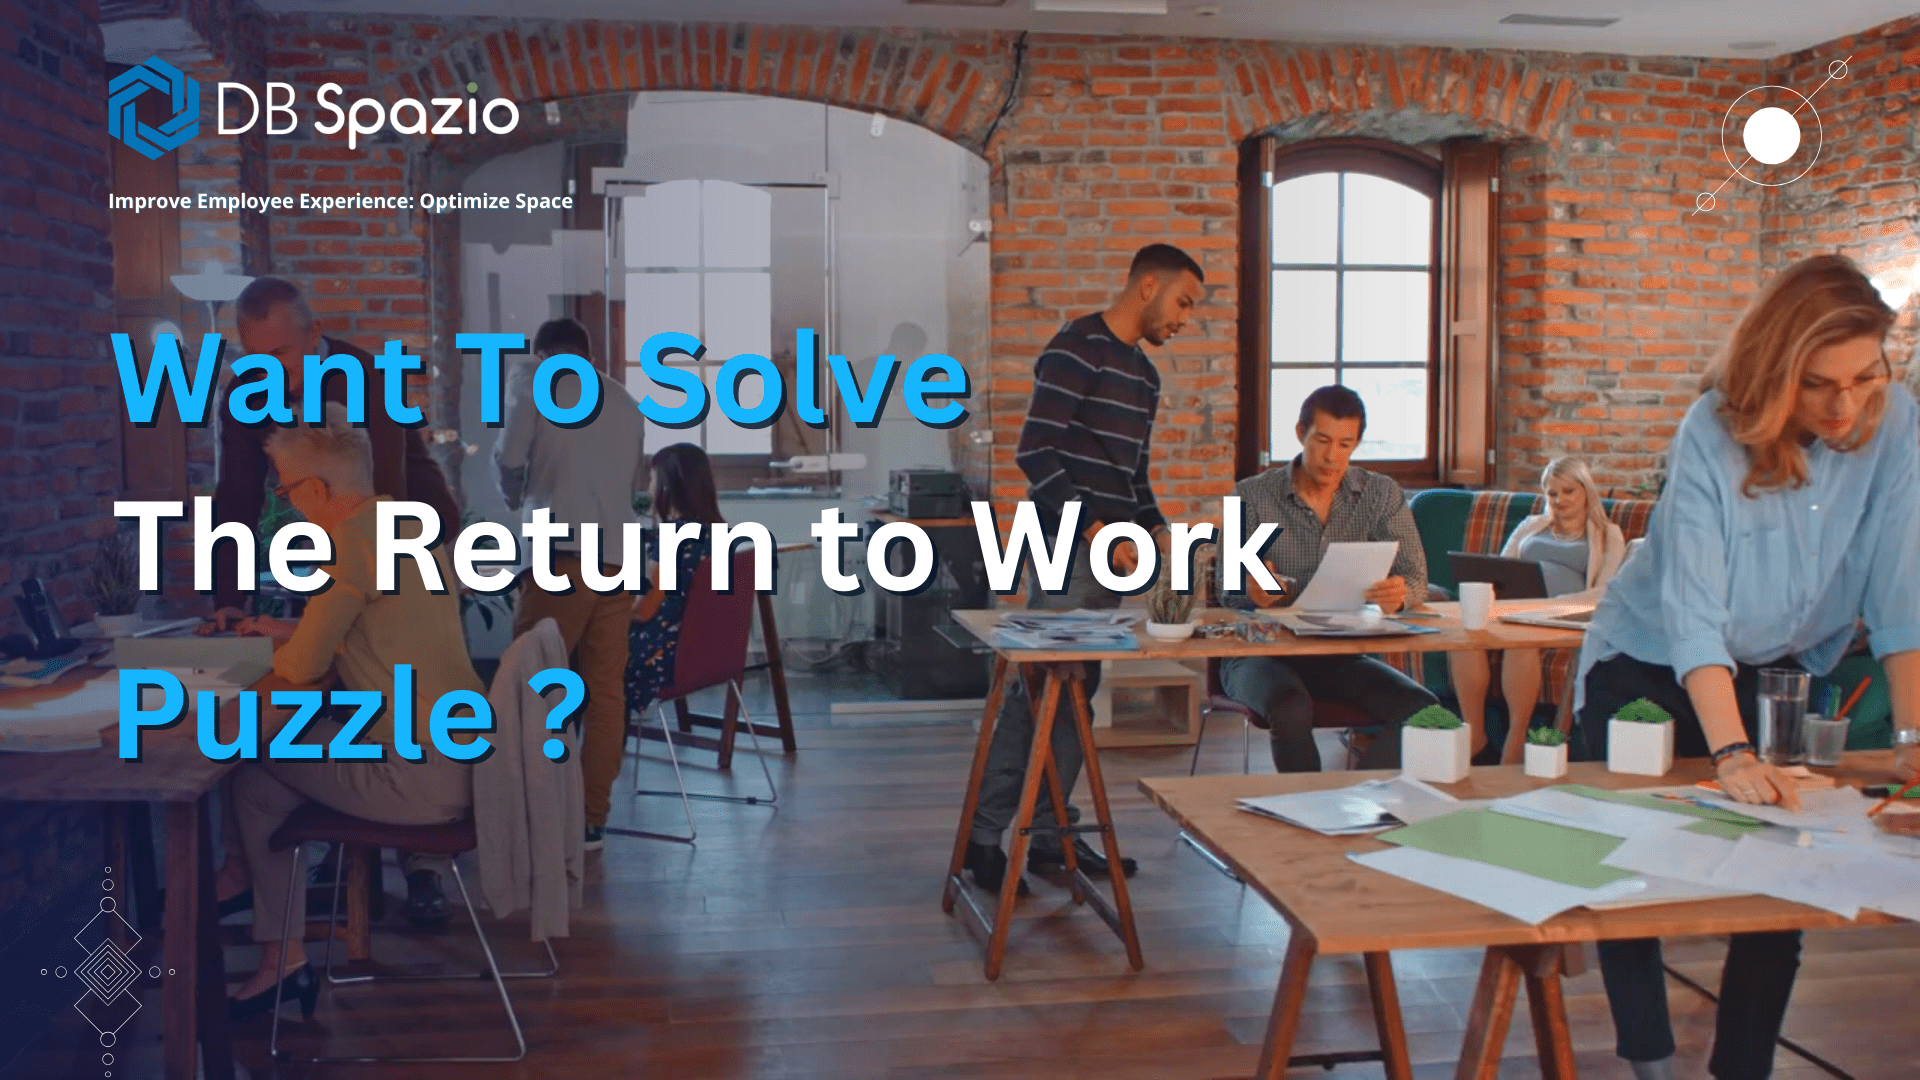 Image shows a thumbnail to a video which talks details the OFFIC model to solve the return to work problem